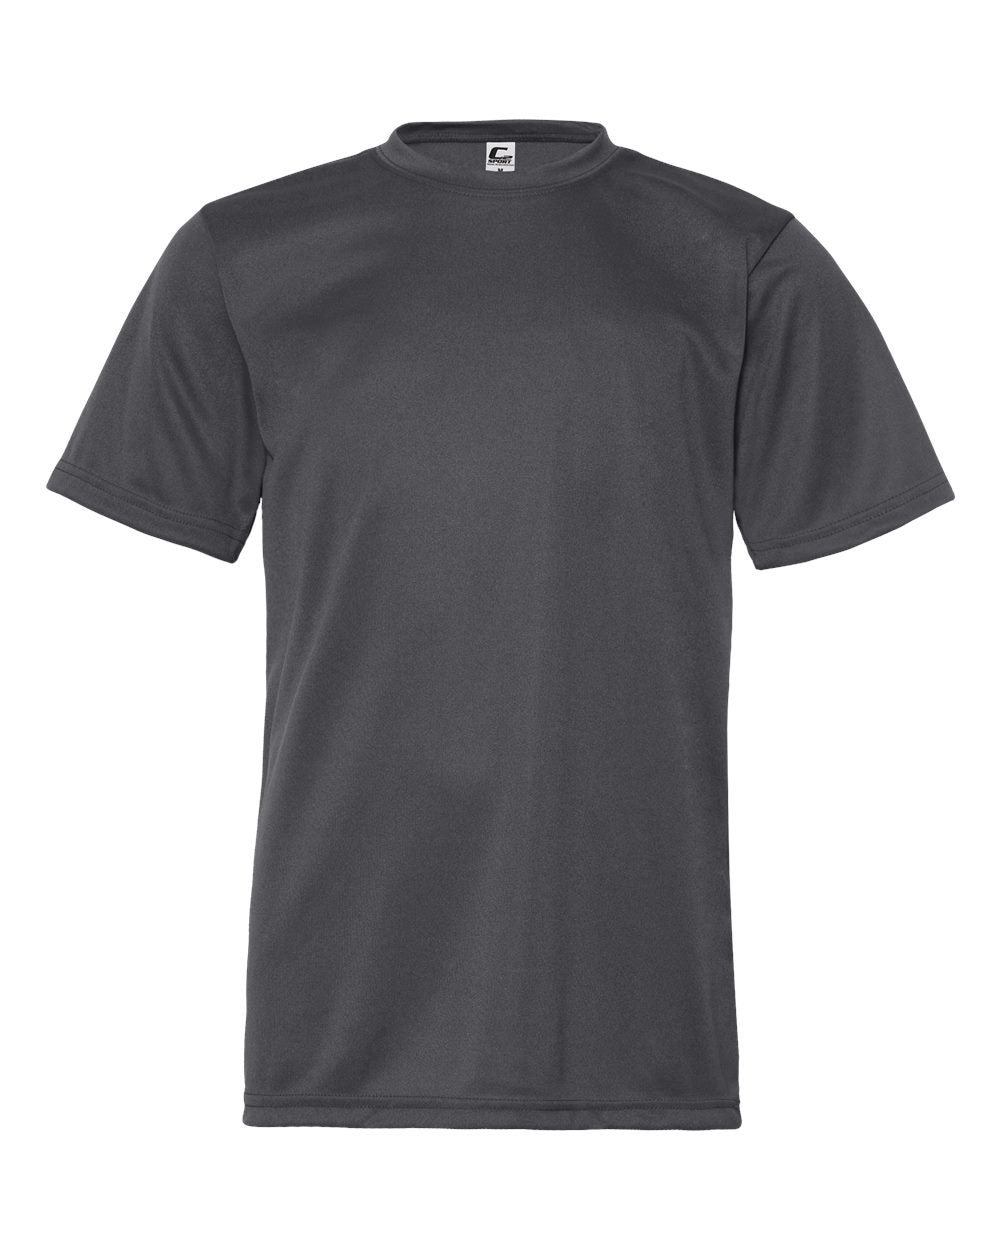 C2 Sport Youth Performance T-Shirt 5200 #color_Graphite